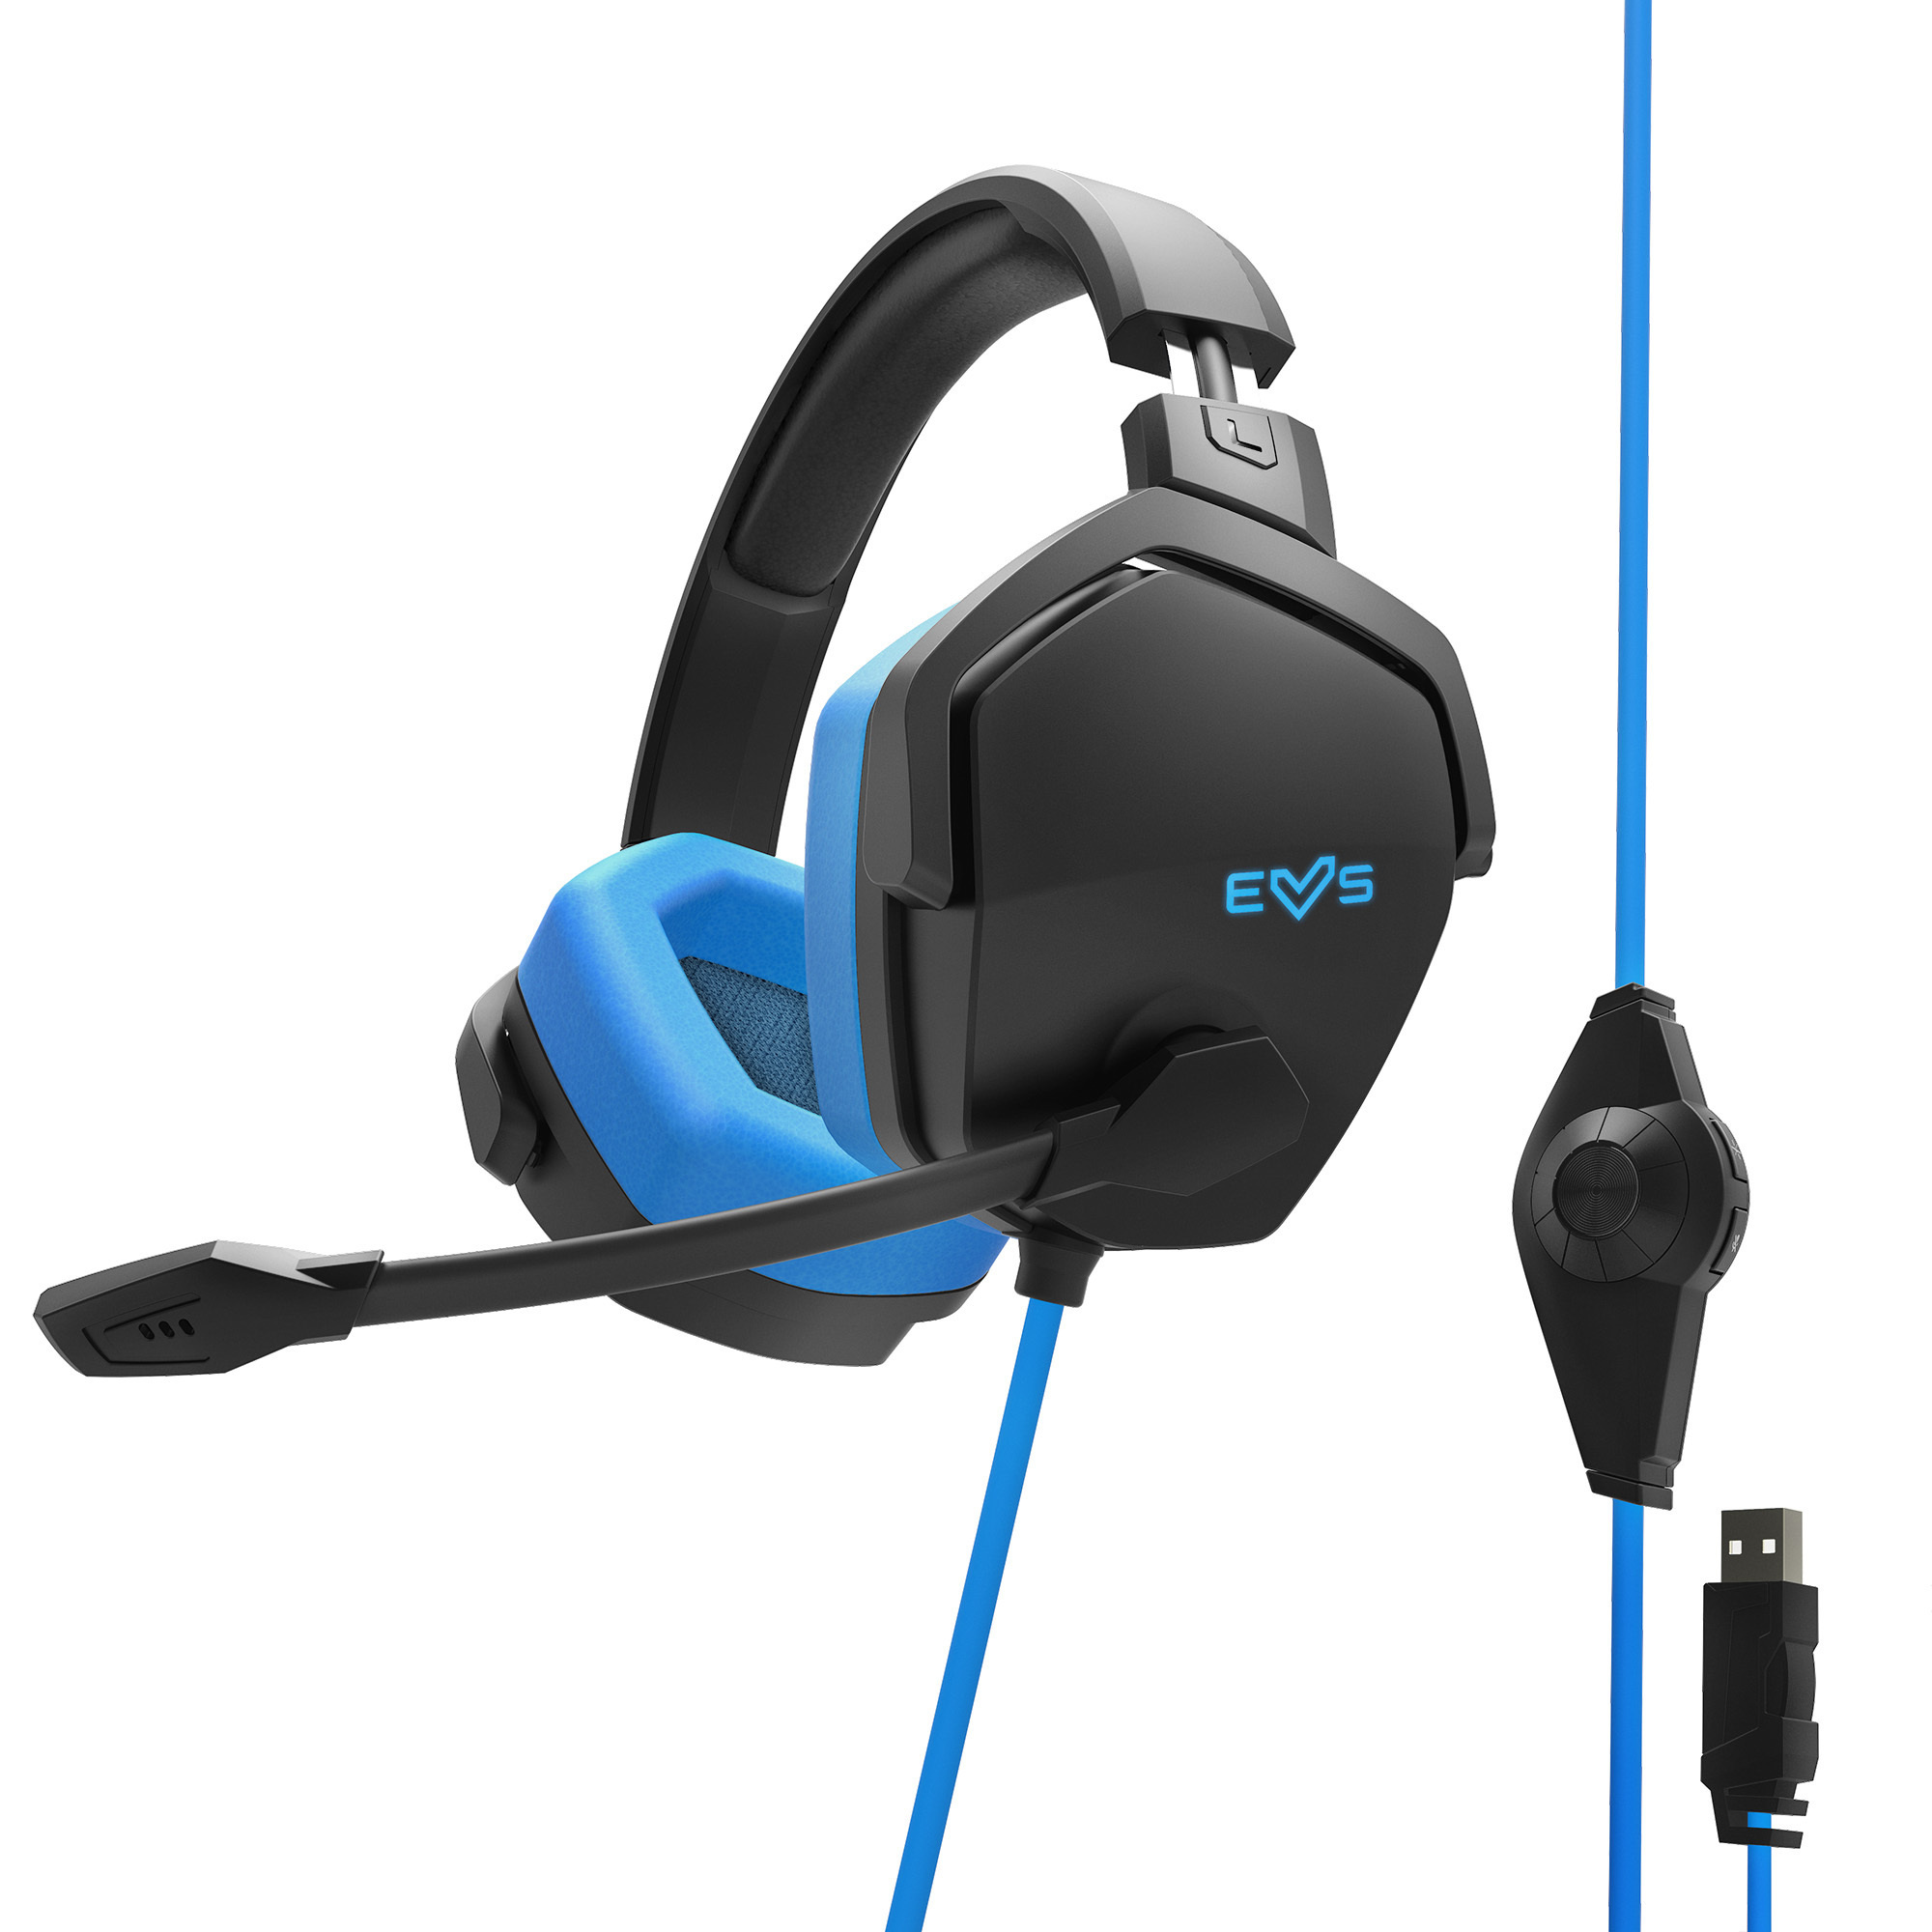 Gaming headset with 7.1 surround sound